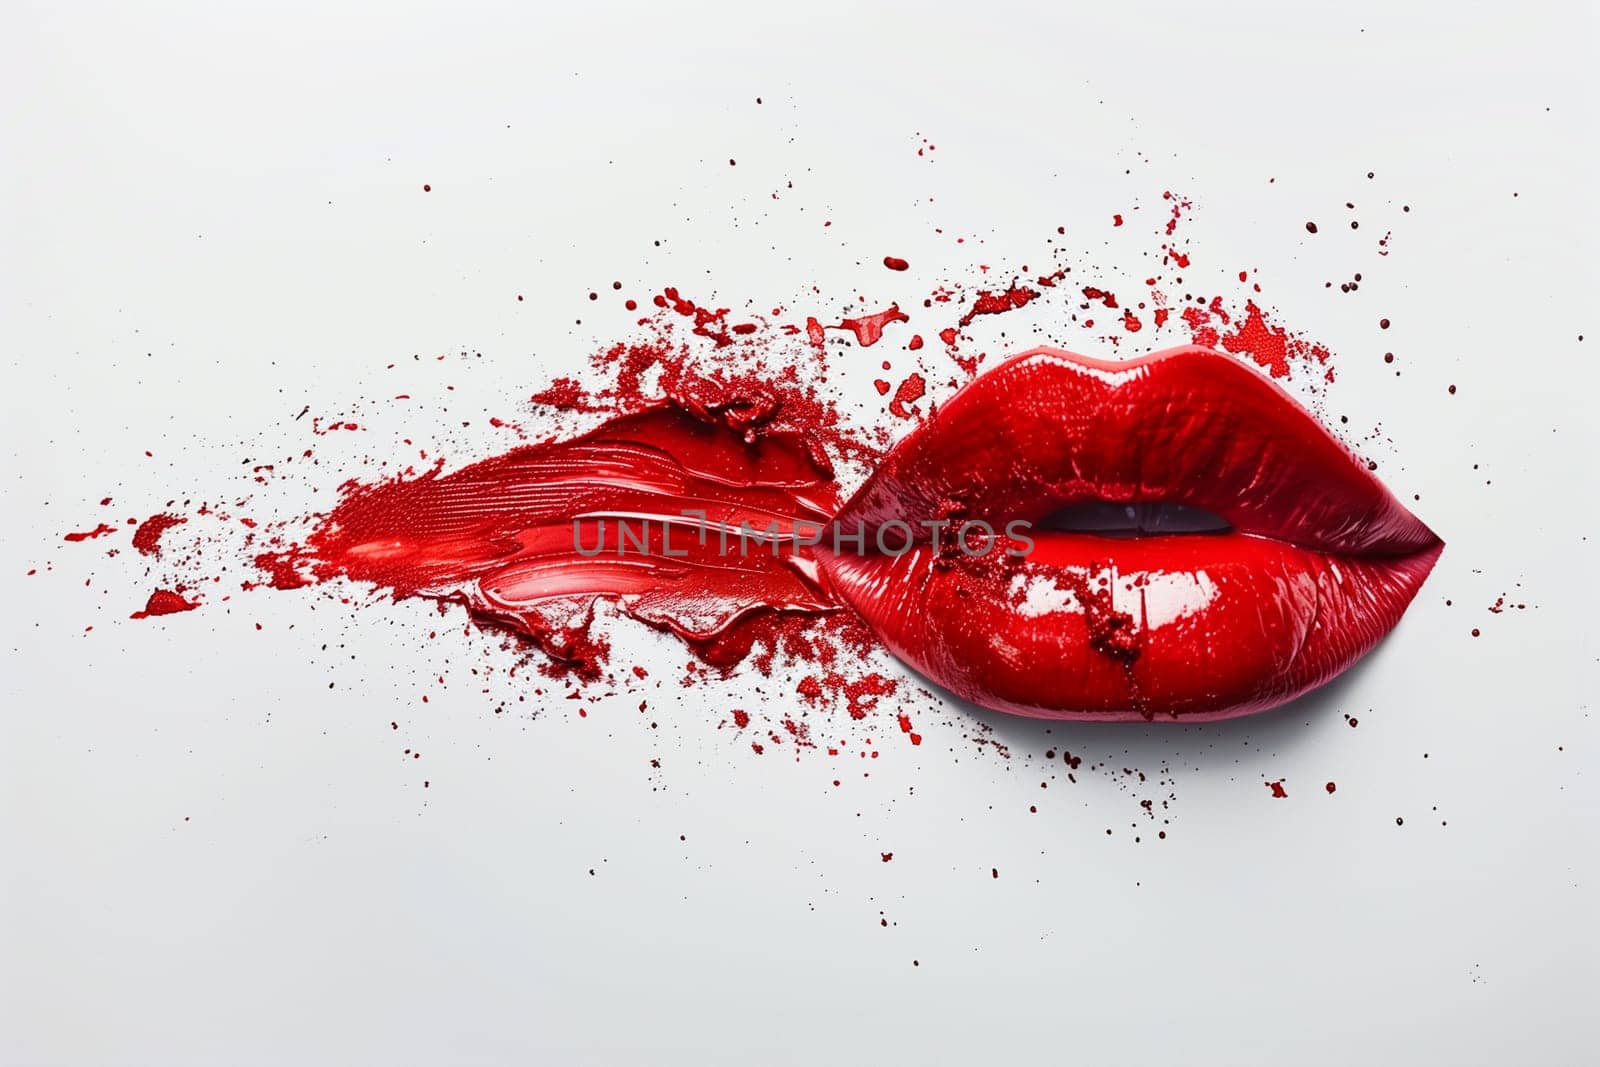 A red lipstick with a portion missing due to a bite taken out of it, showcasing a unique and unconventional use of the cosmetic item.